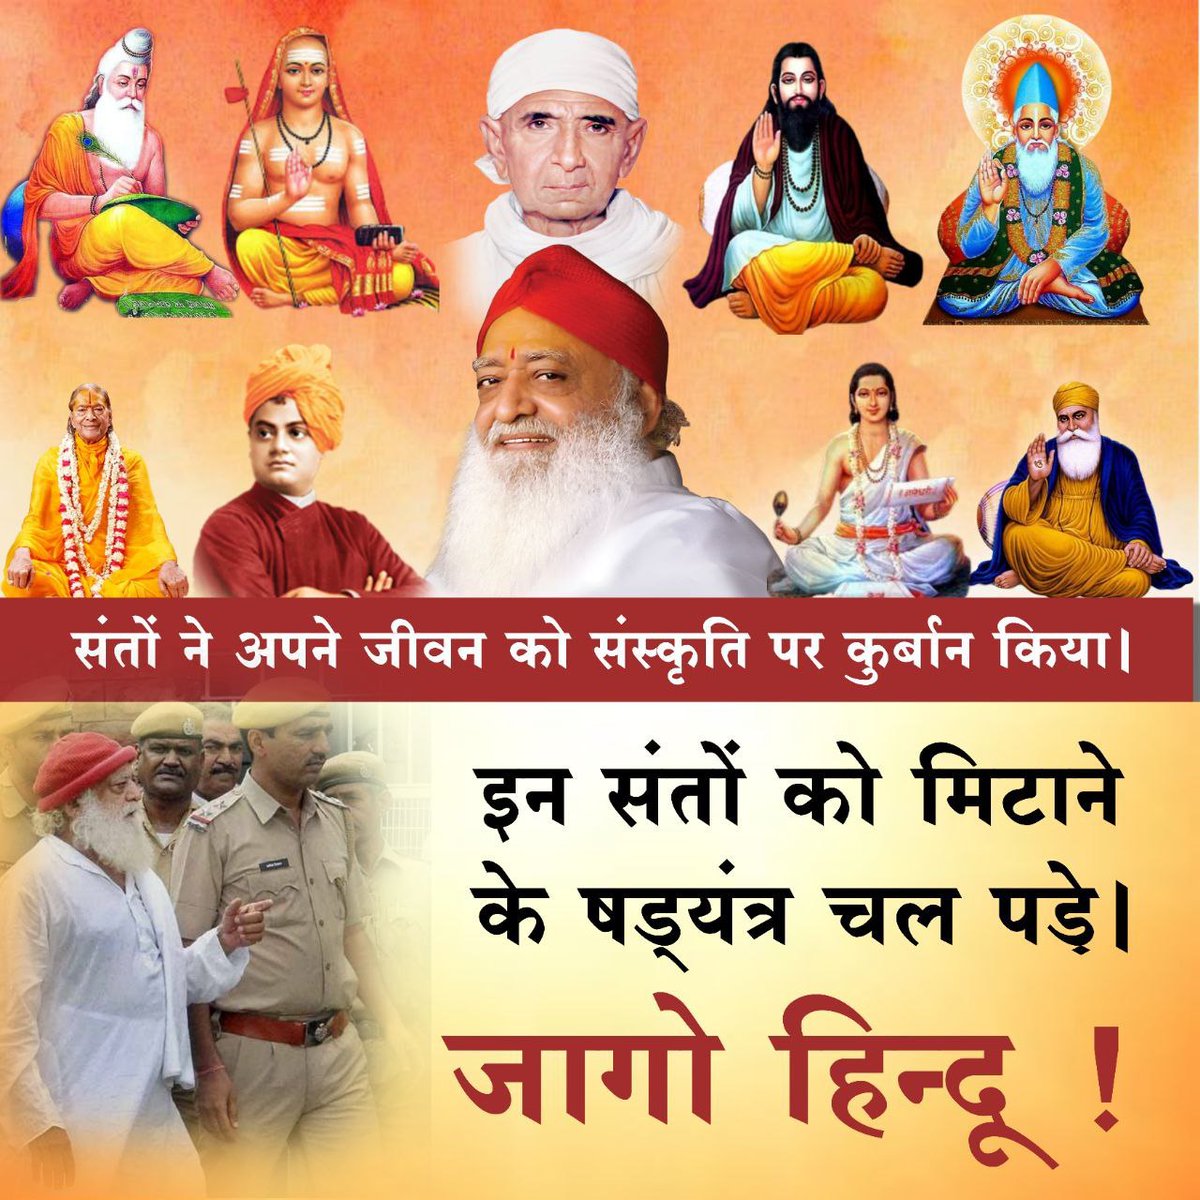 Sant Shri Asharamji Bapu is the pillar of Sanatan Dharma and today He is being kept in jail for 11 and a half years without any evidence. #संत_हैं_तो_संस्कृति_है ,संस्कृति है तो राष्ट्र है। Keeping saints, the pillars of culture in jail is a loss to the Nation. Jaago Hindu Jaago